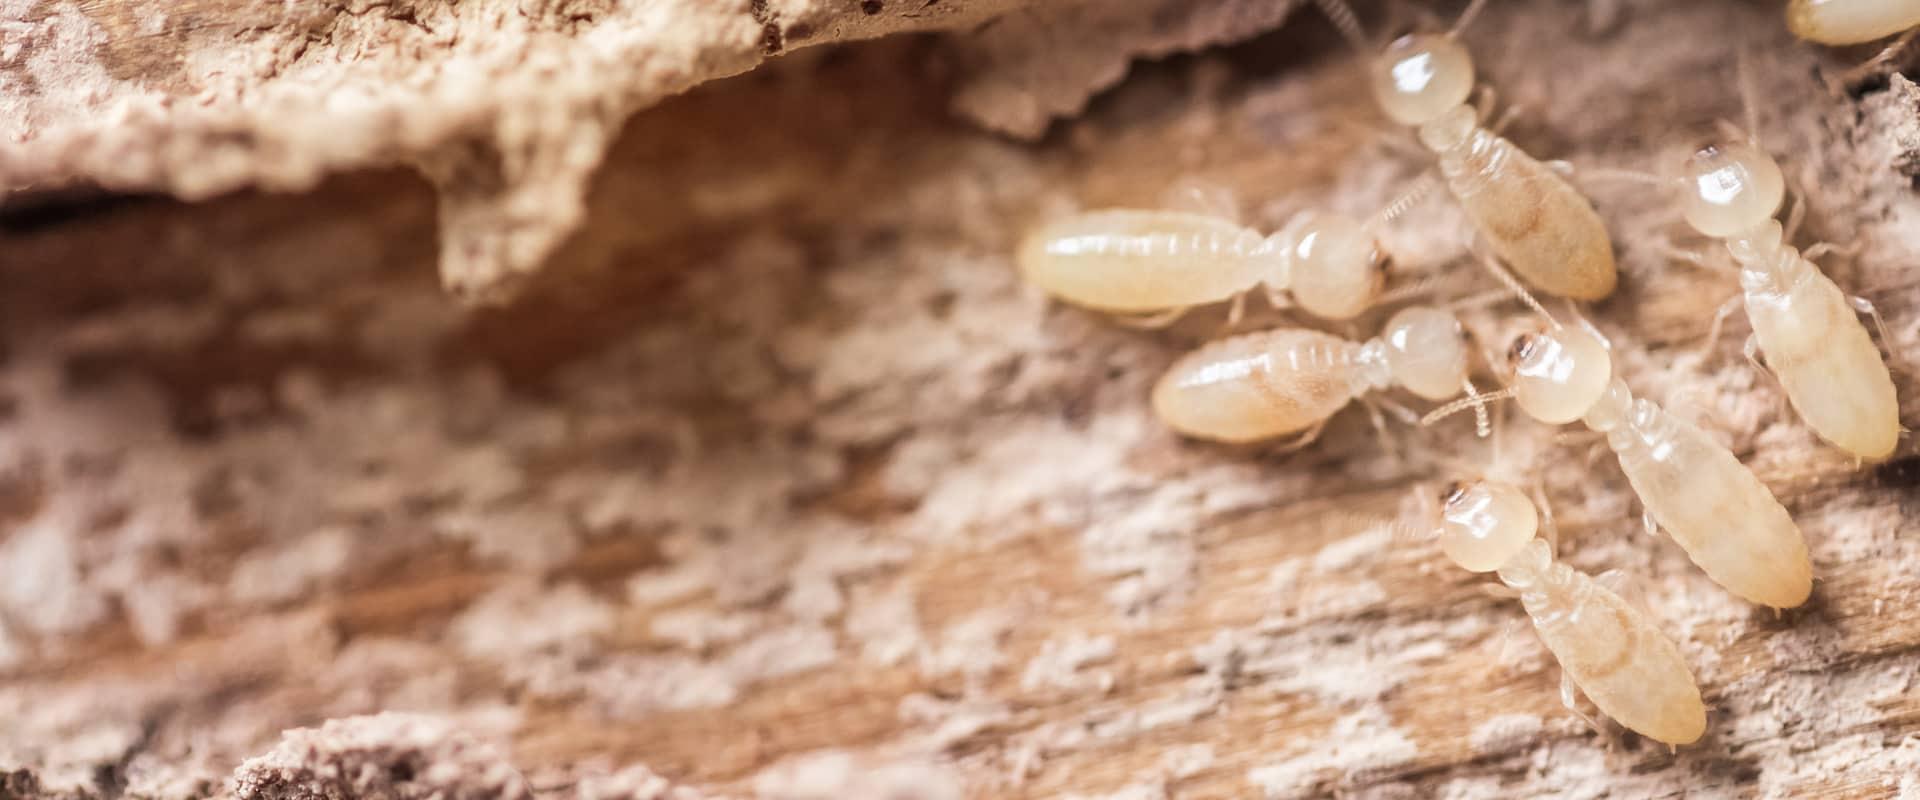 several termites crawling on damaged wood at a home in dallas texas